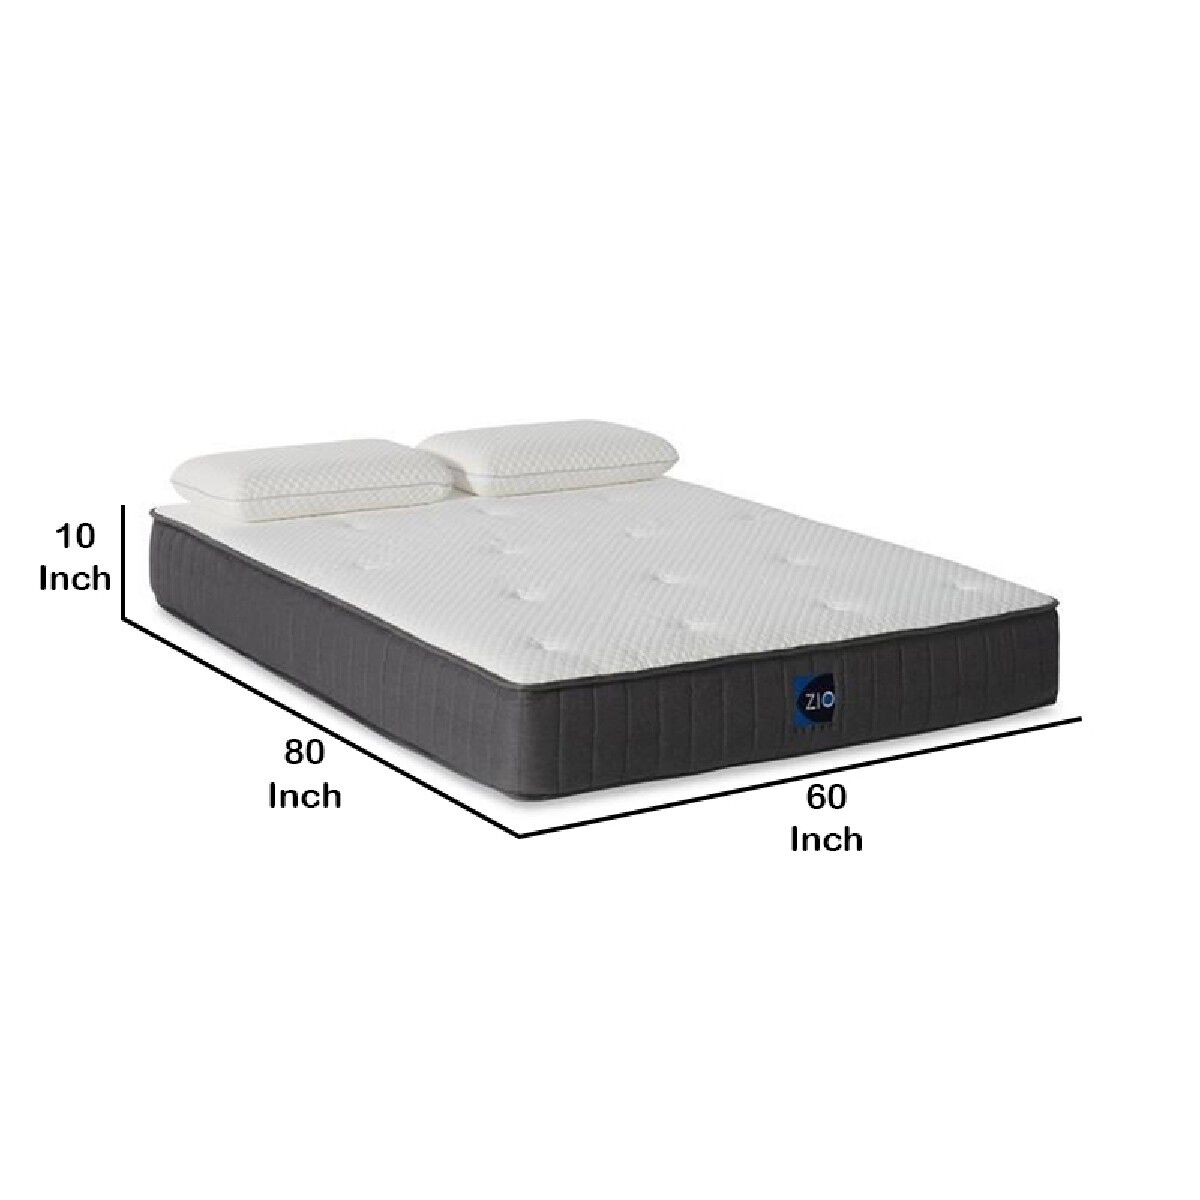 Queen Size Gel Infused Memory Foam Mattress, White and Gray